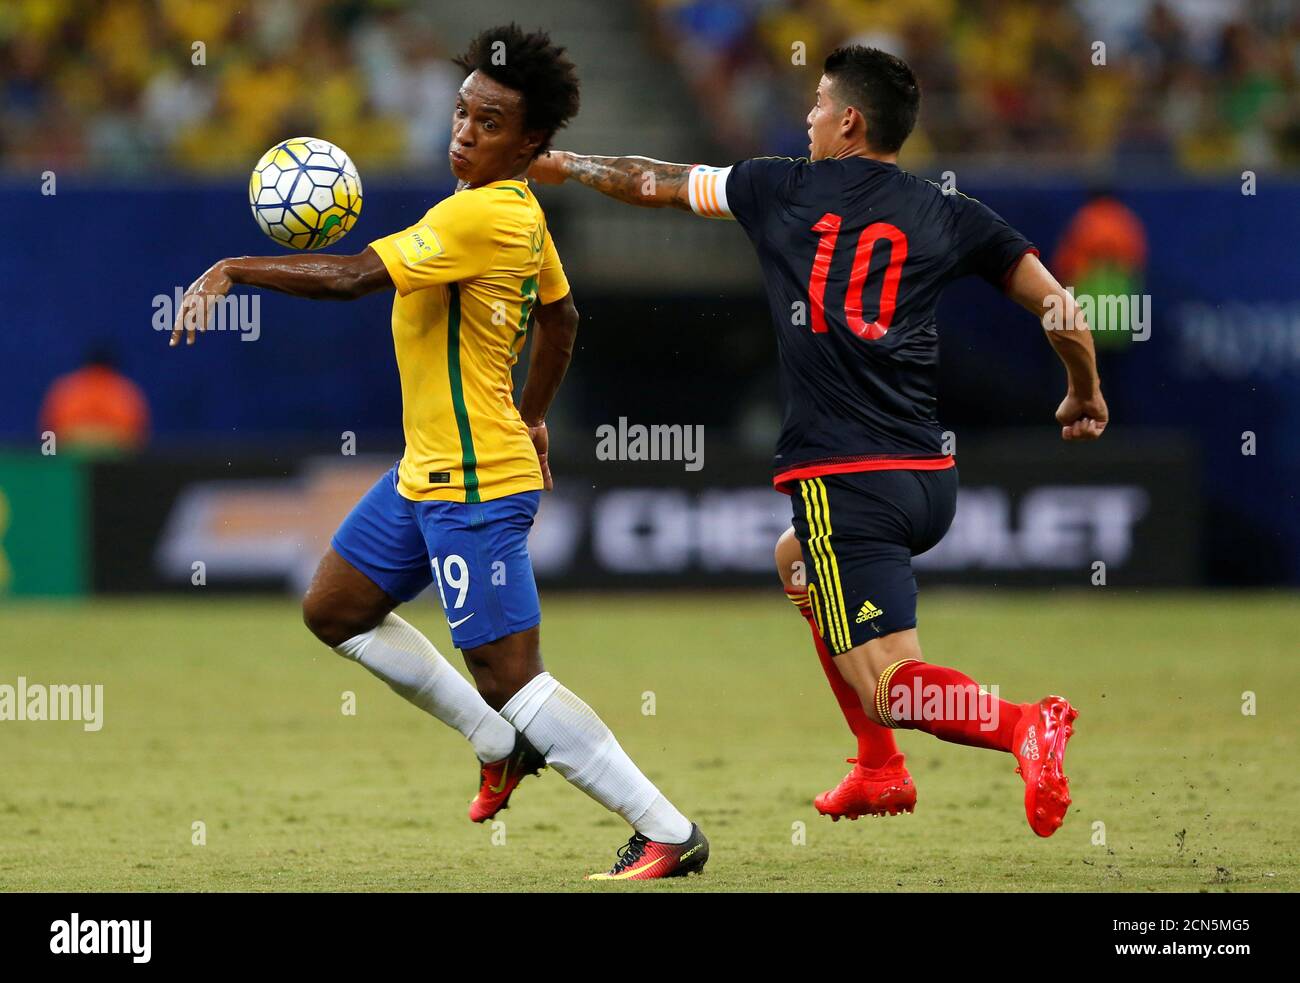 Football Soccer - World Cup 2018 Qualifiers - Brazil v Colombia - Amazonia Arena Stadium, Manaus, Brazil - 6/9/16. Willian (L) of Brazil in action with James Rodriguez of Colombia.   REUTERS/Bruno Kelly Stock Photo